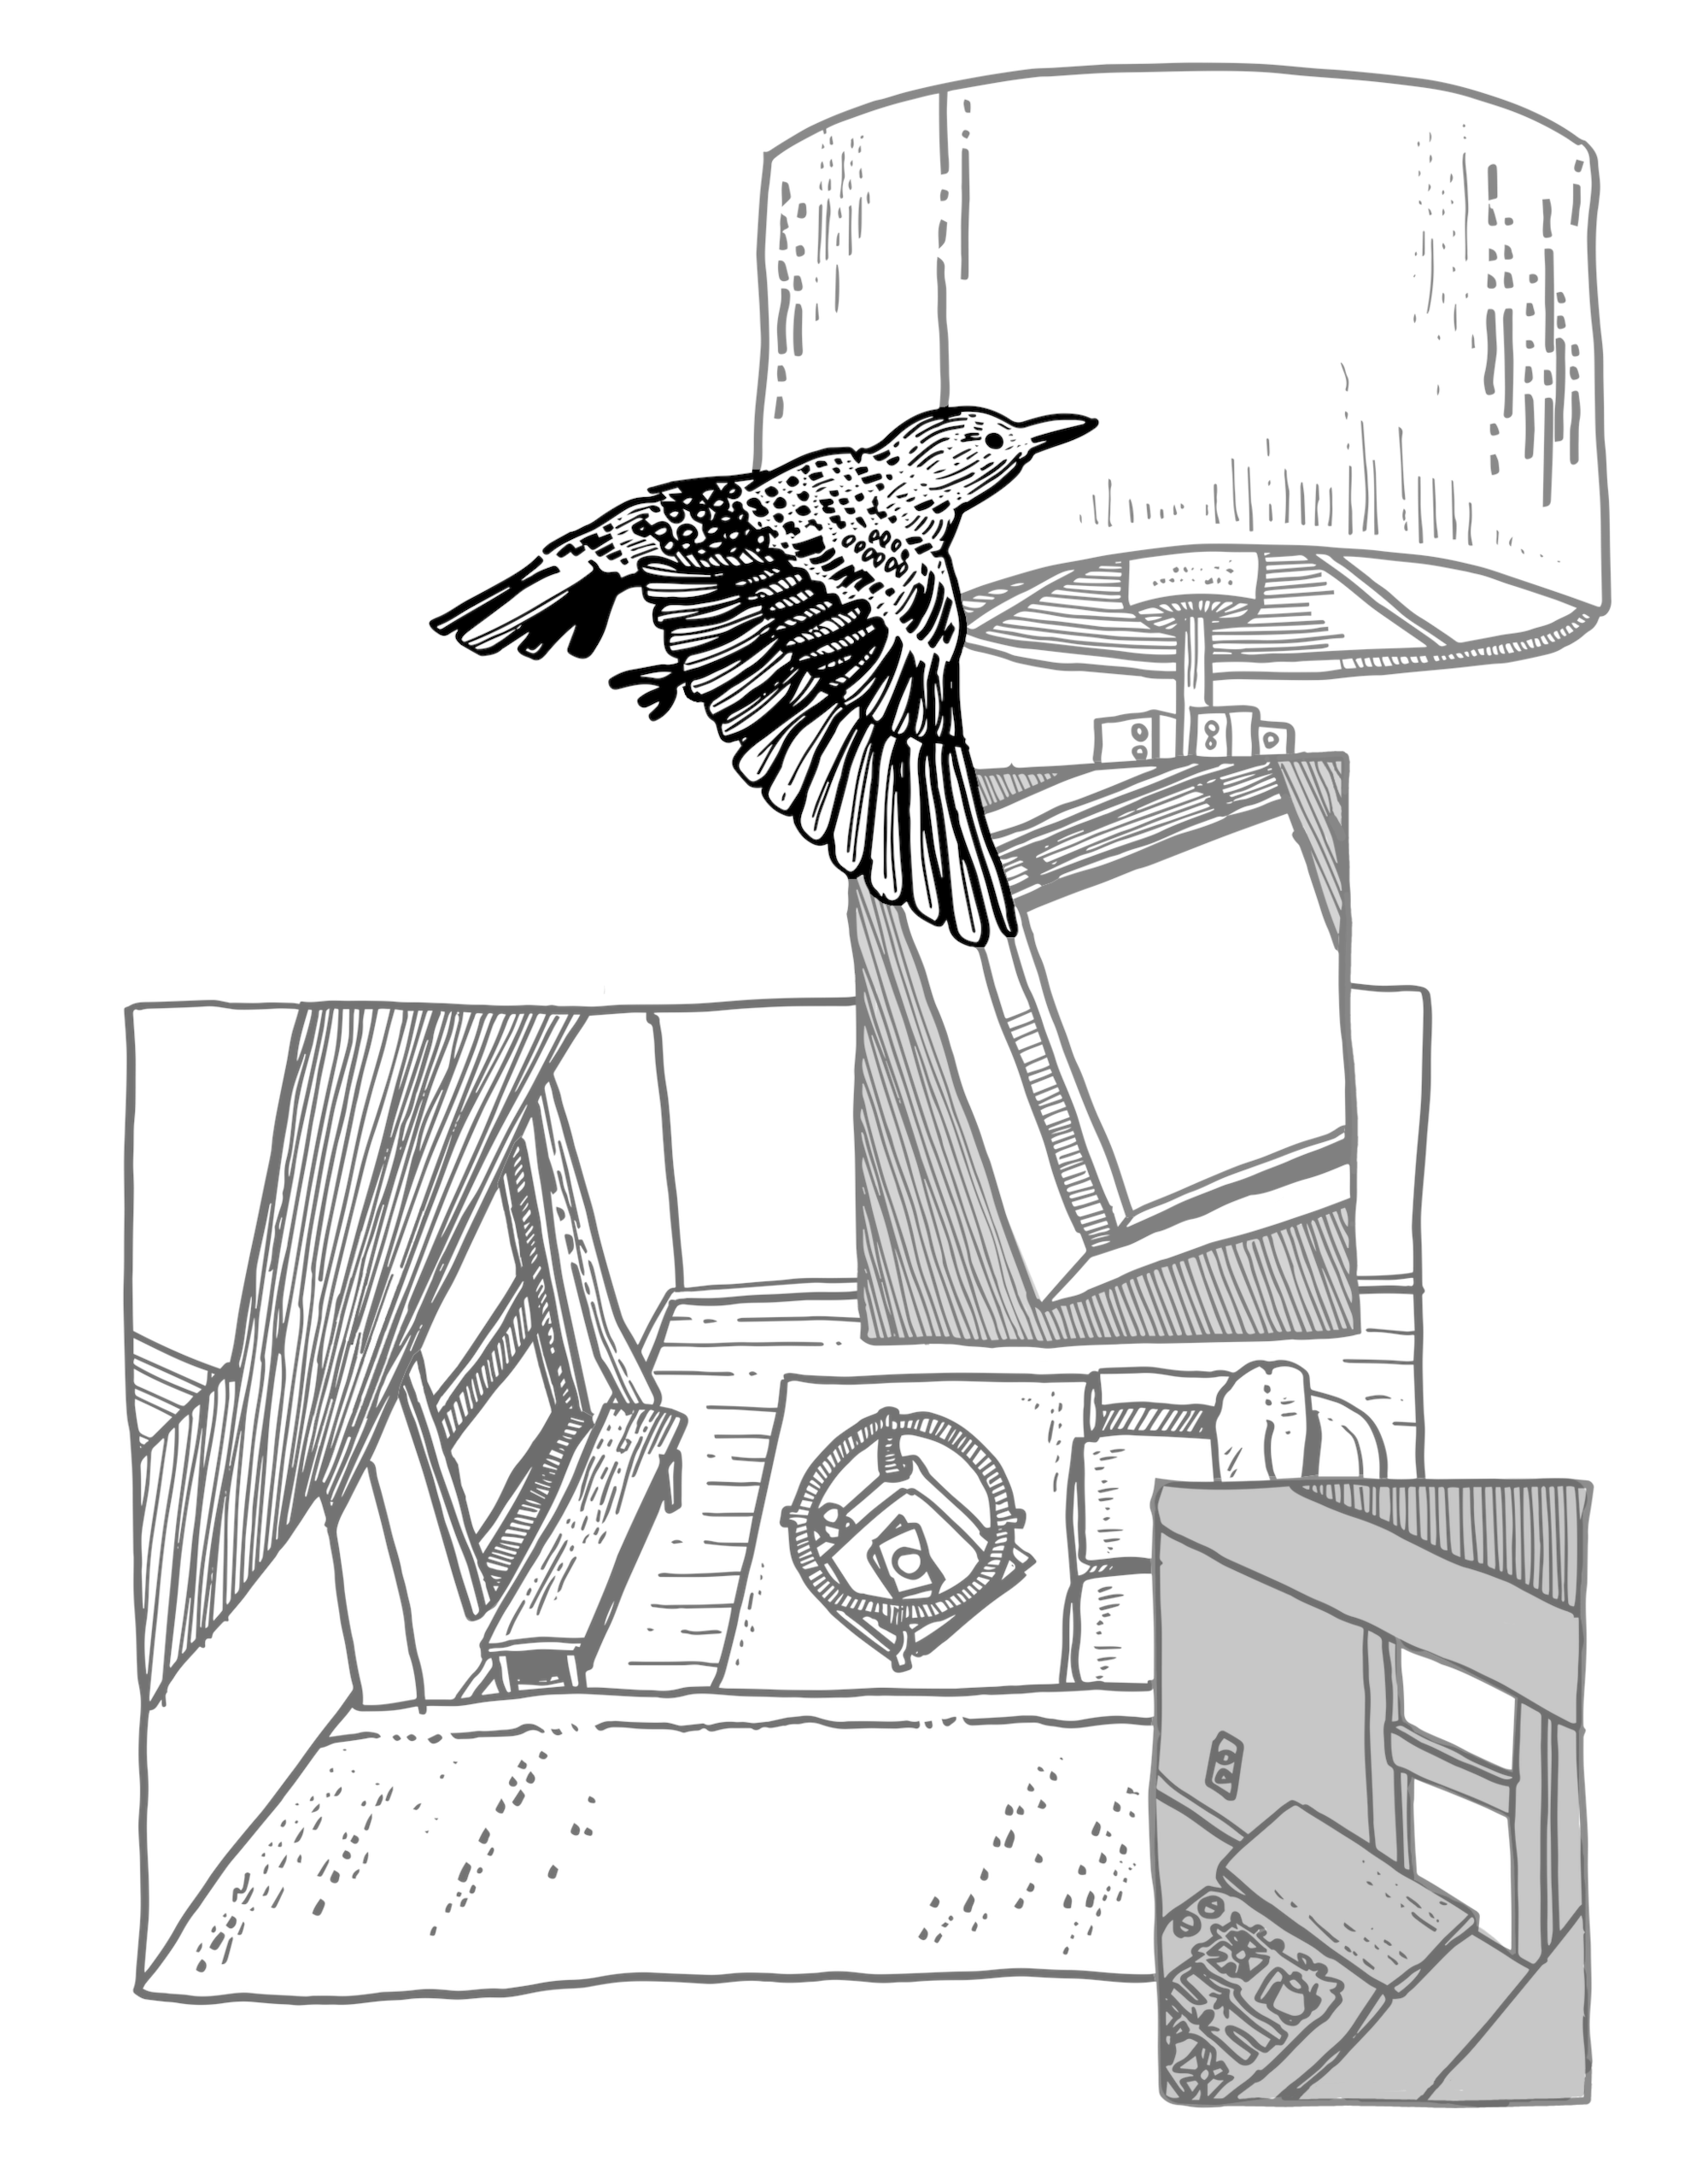 full comics page 3 about how a bird in the house